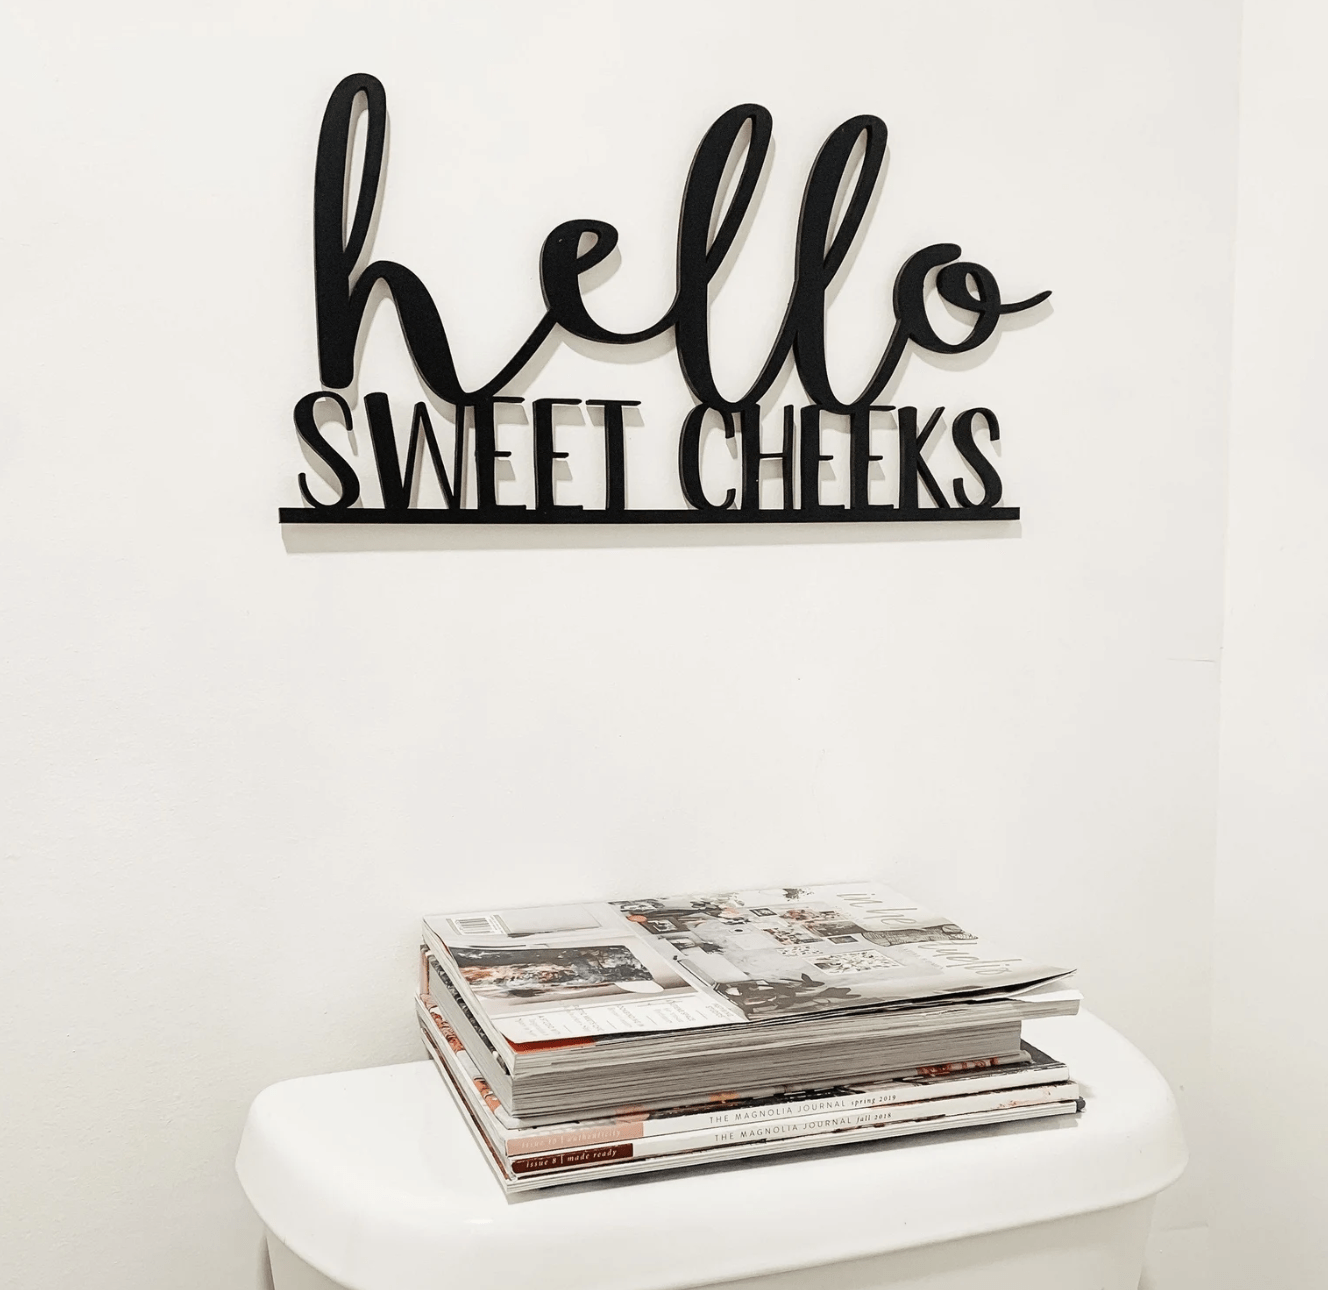 hello sweet cheeks black iron cut out bathroom sign hanging over toilet stack of magazines